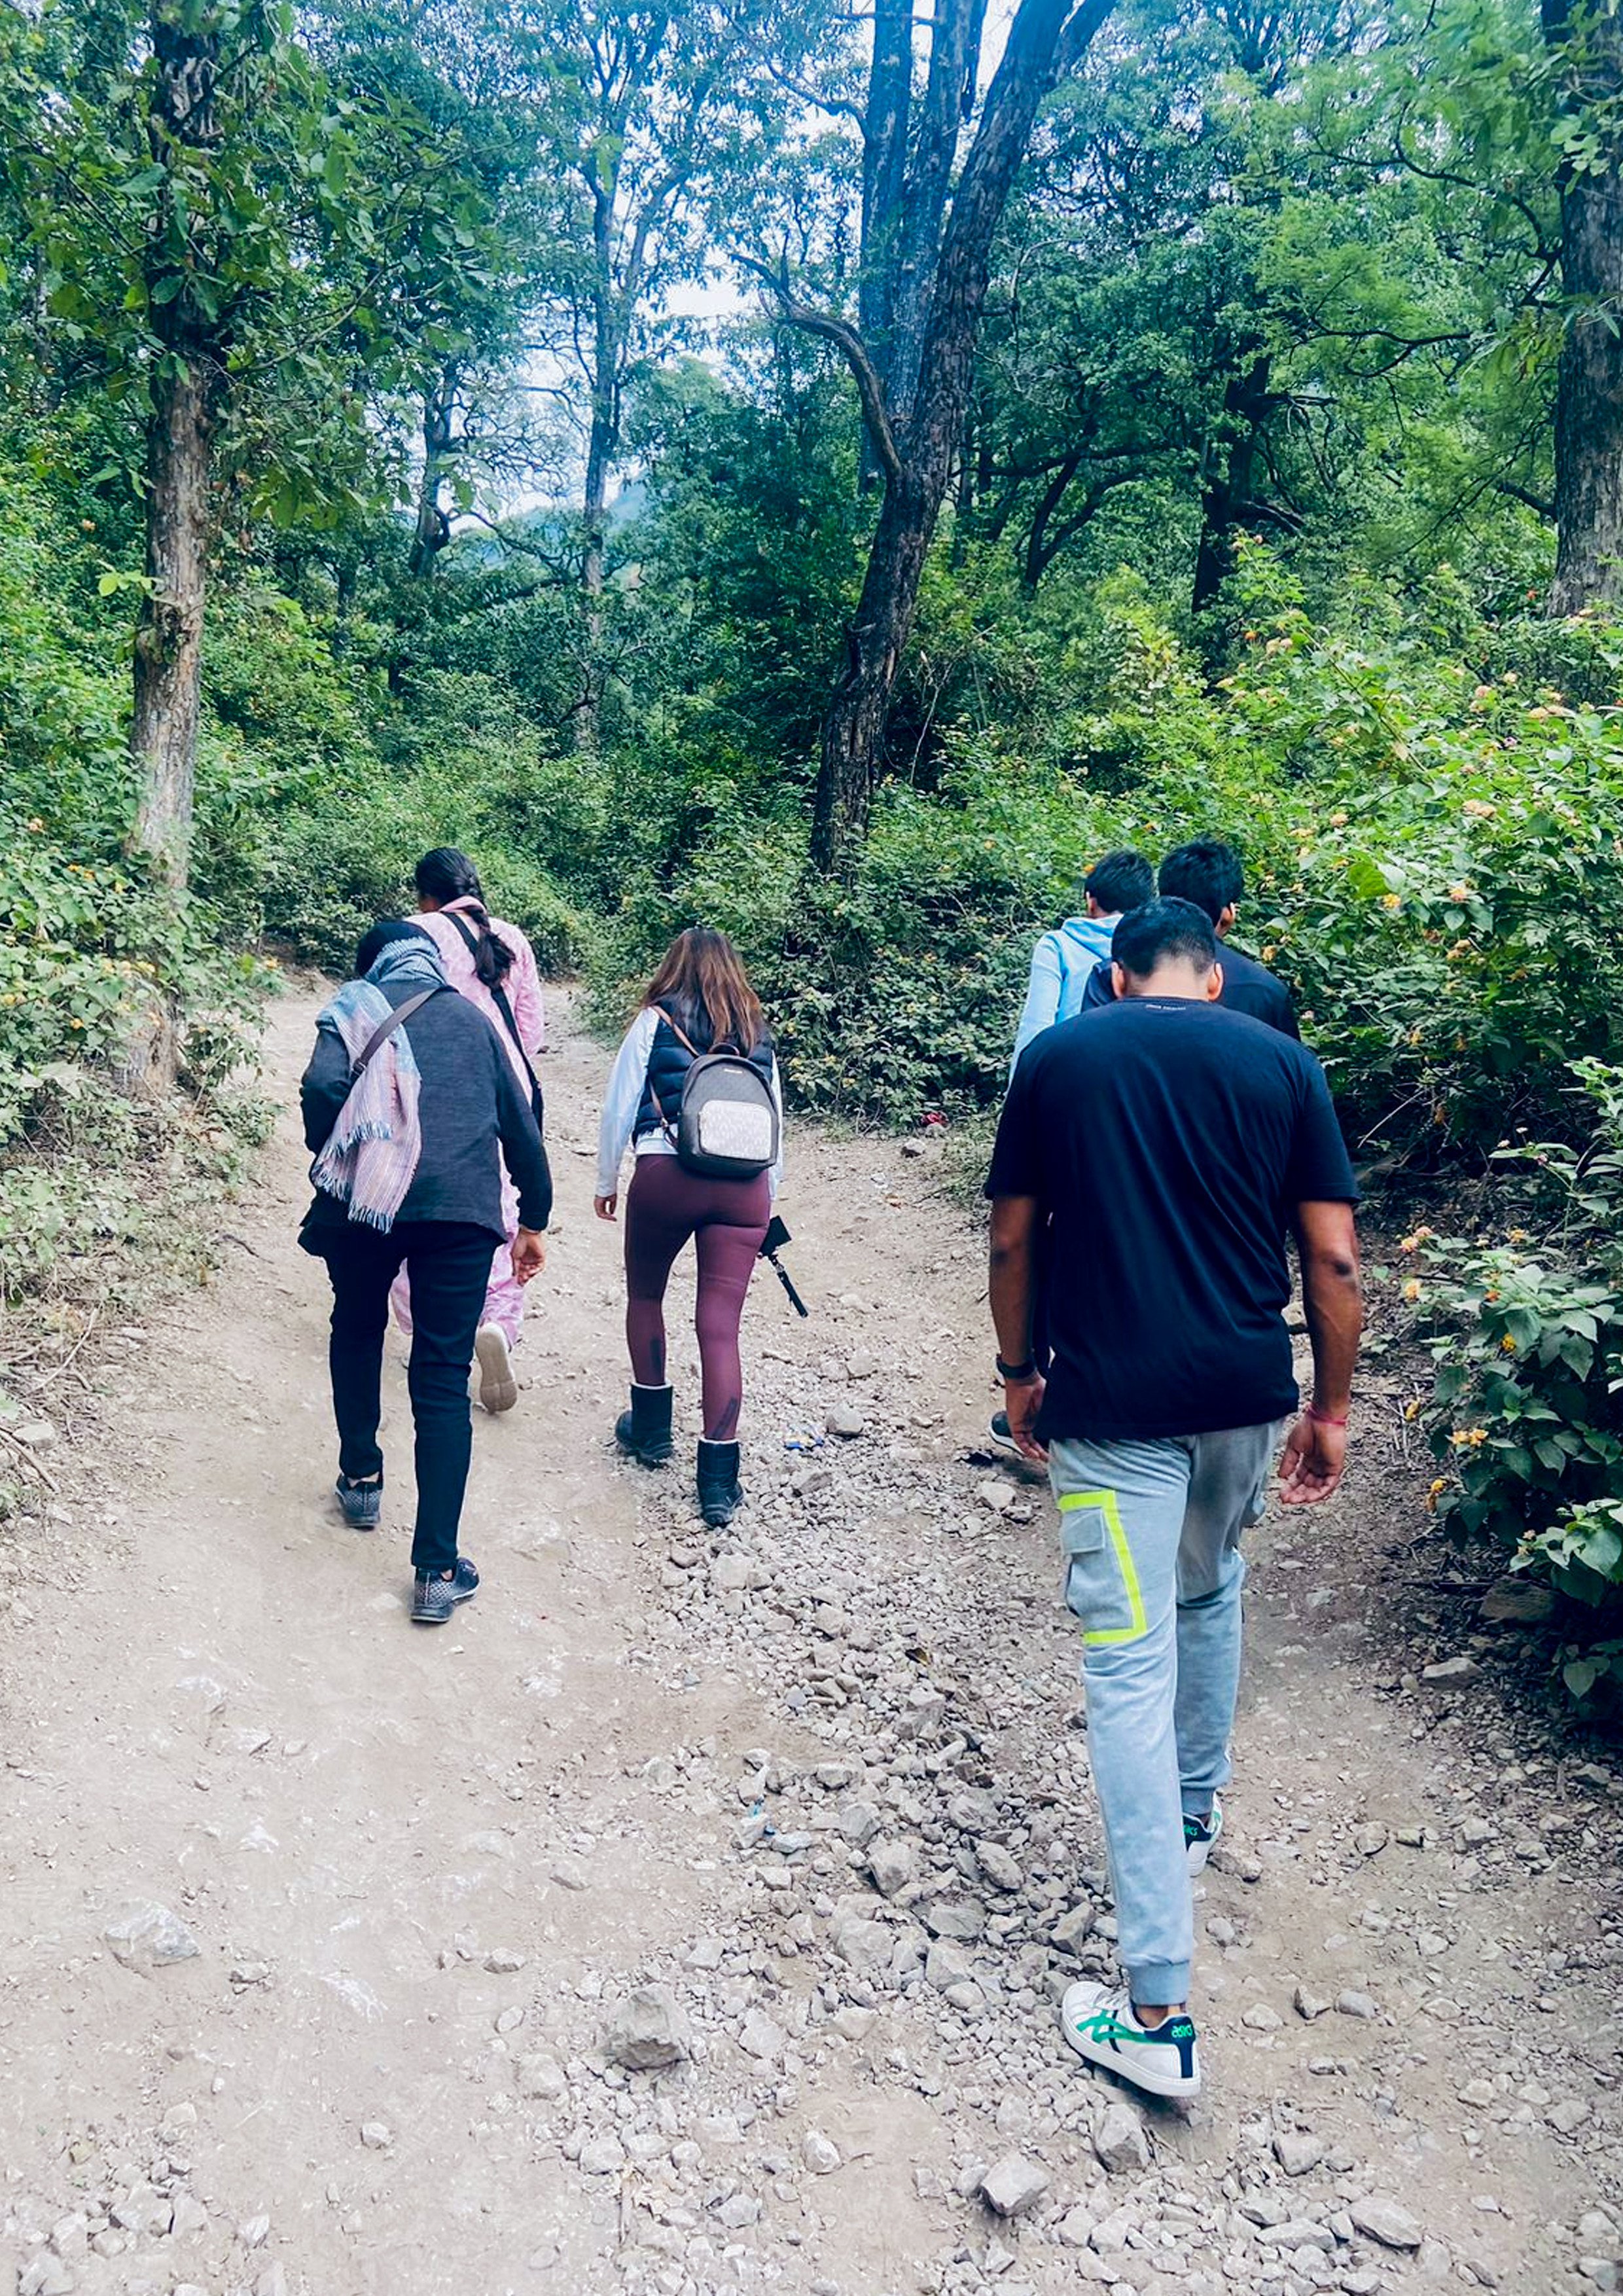 Participants in “forest bathing” at a retreat in India. Corporate high-fliers there and elsewhere have joined the “anti-grindset” movement that prioritises achieving better work-life balance. Photo: Ekaanta